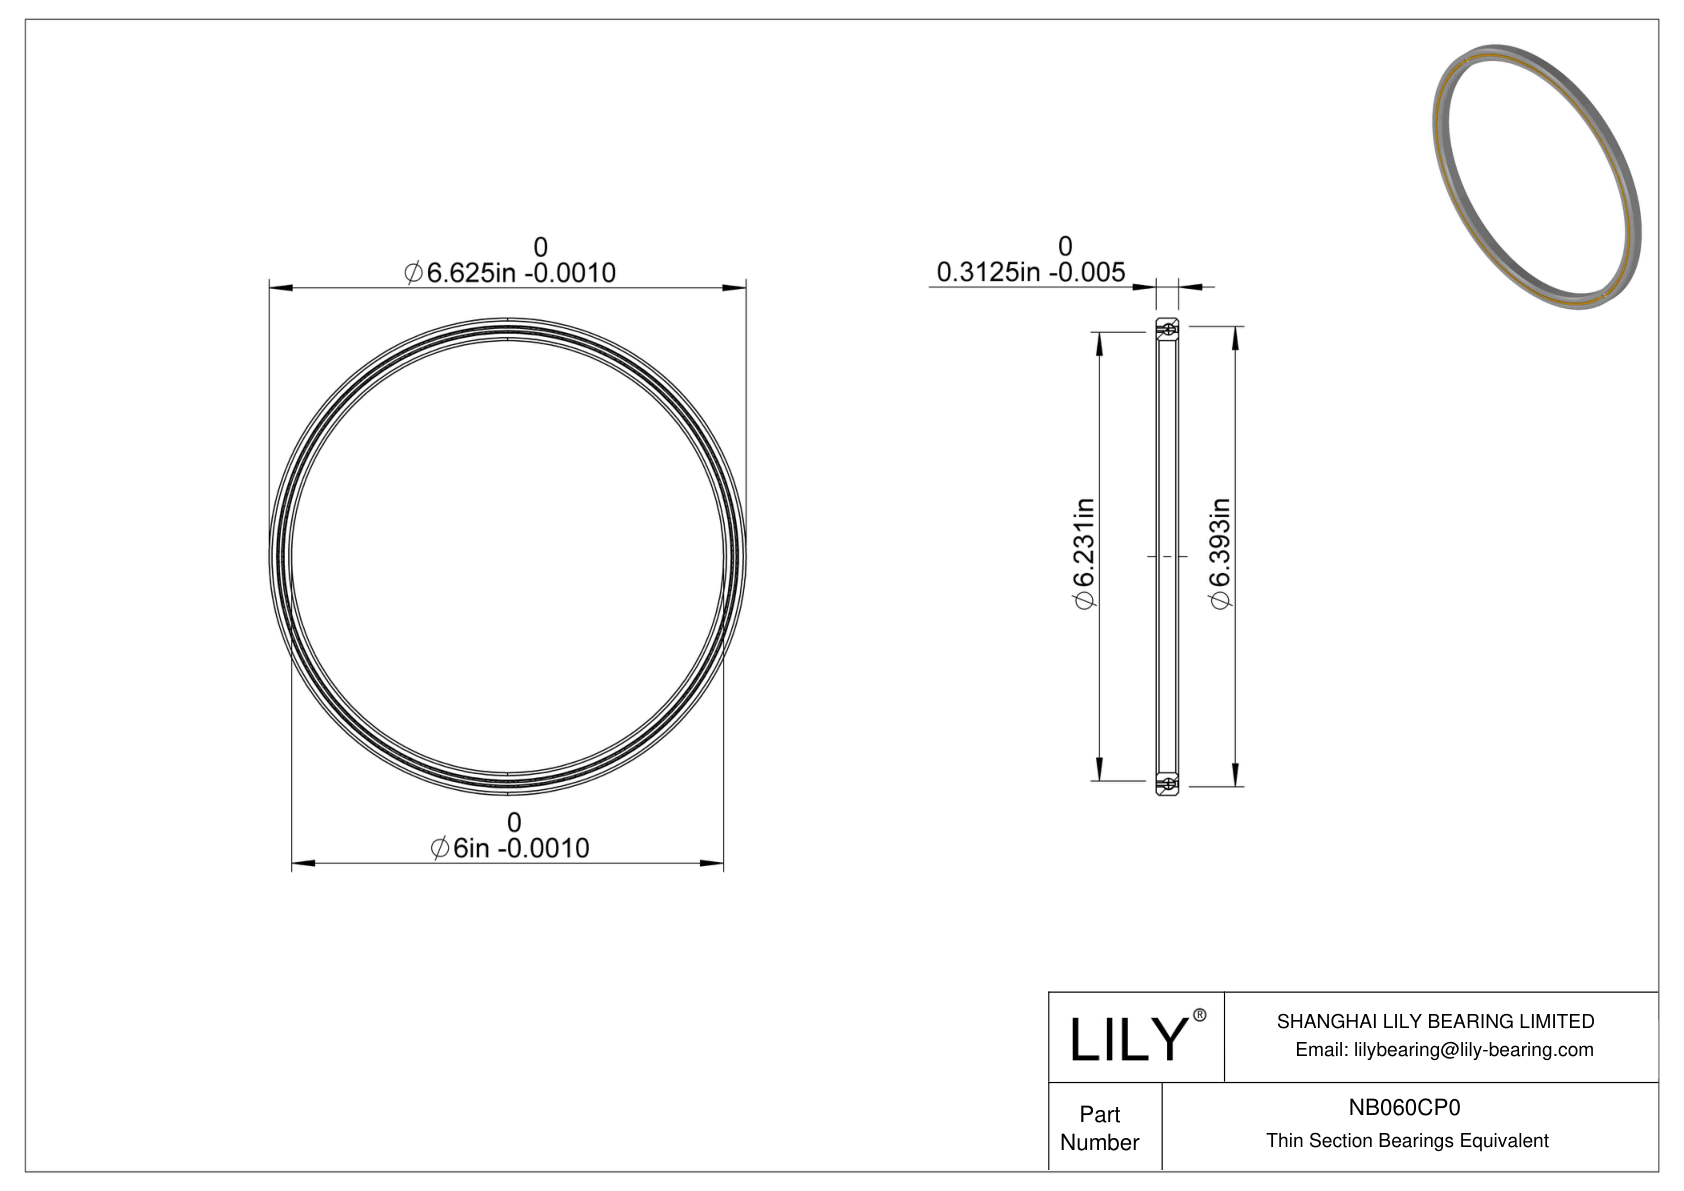 NB060CP0 Constant Section (CS) Bearings cad drawing